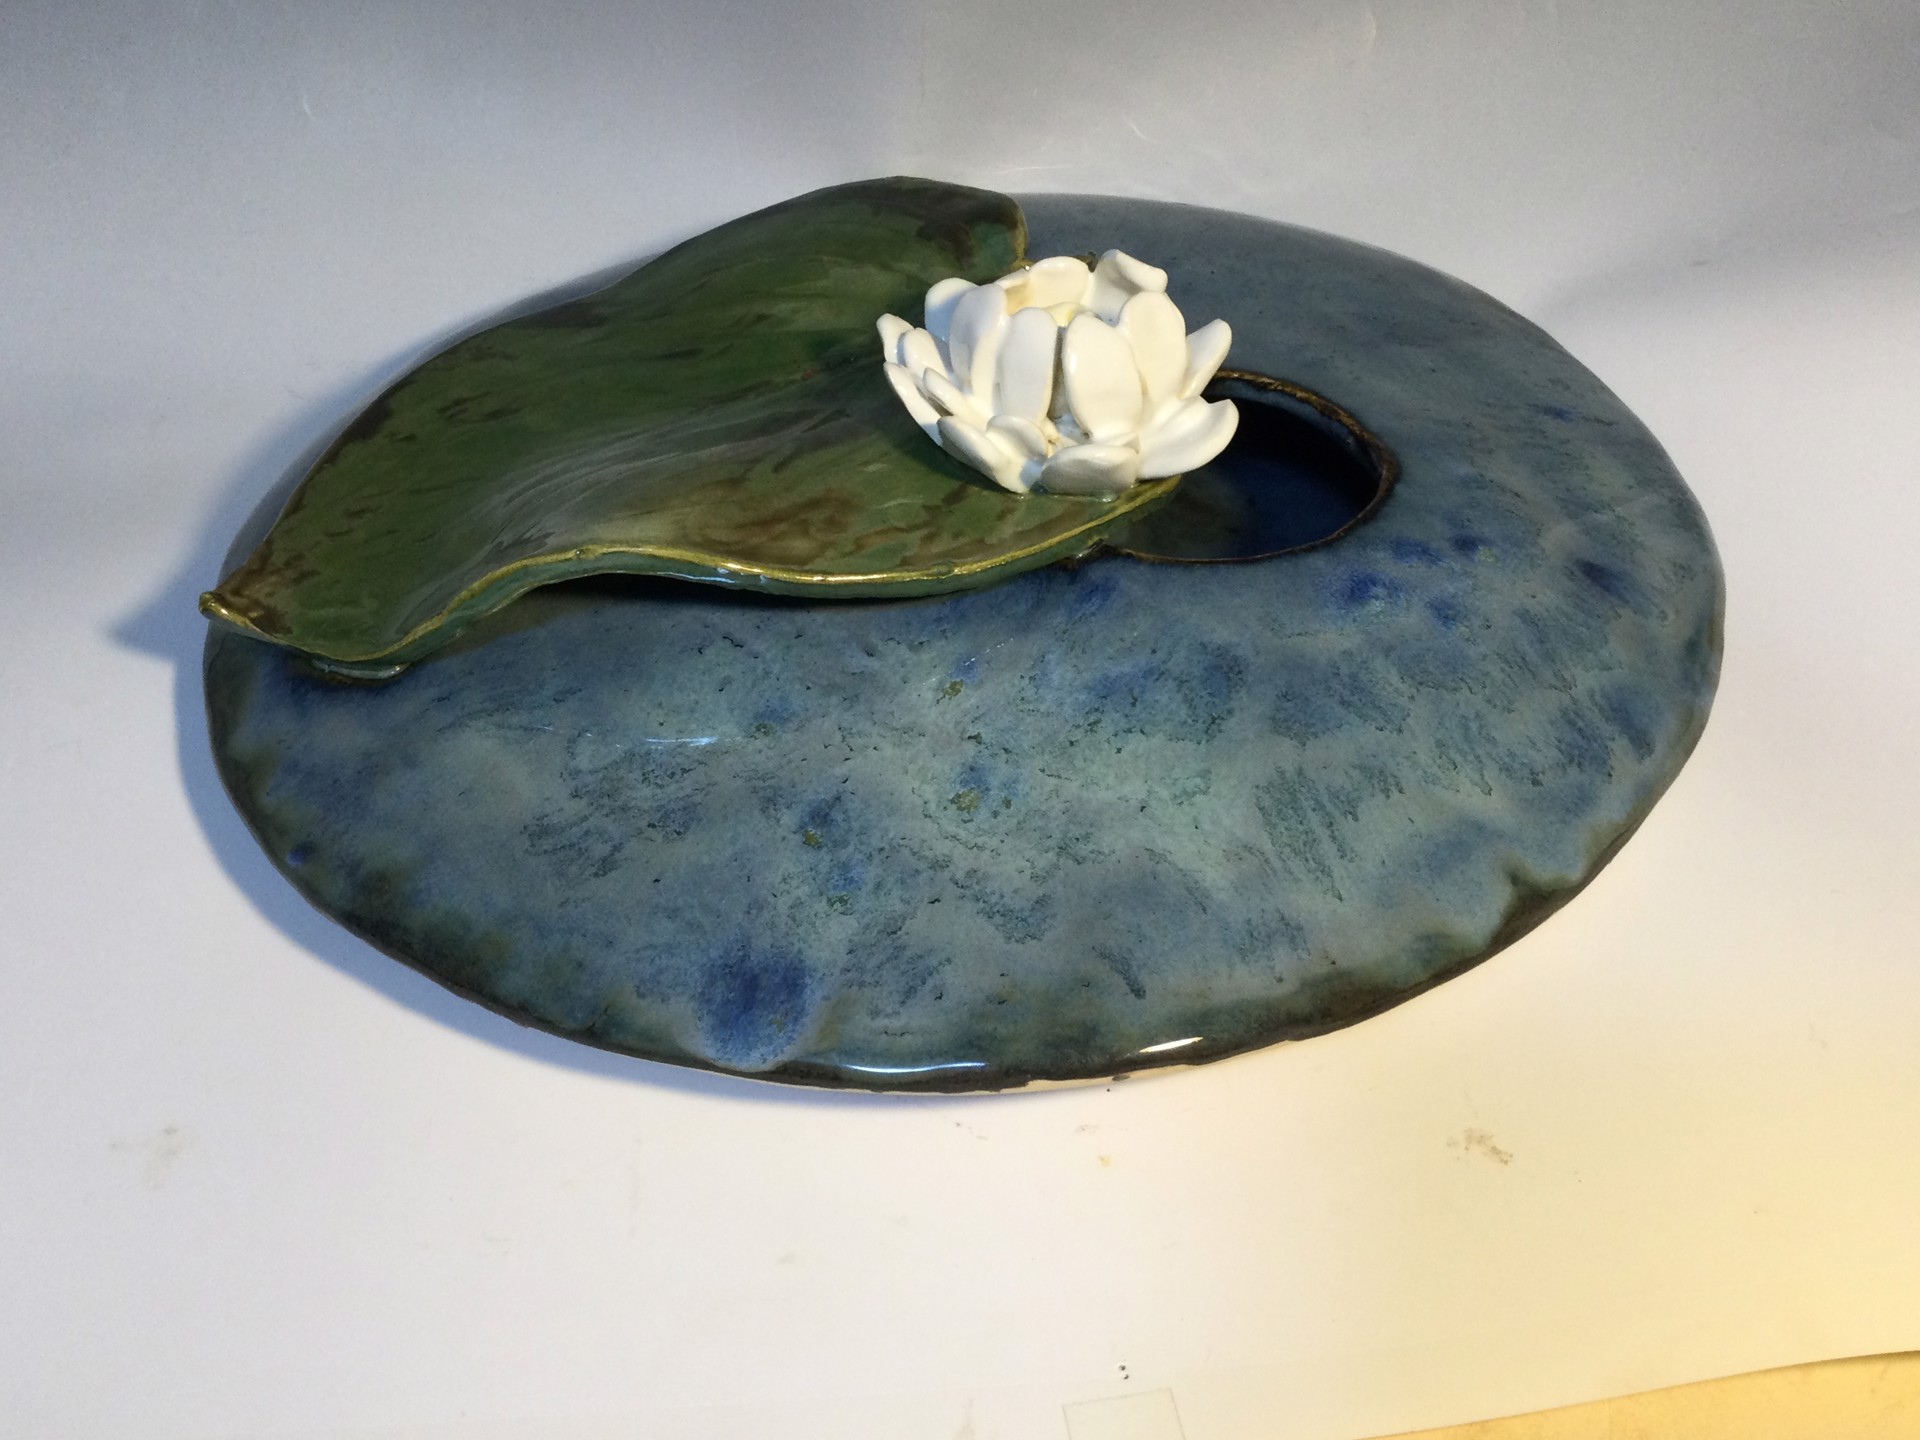 Lily Pad Centerpiece by Anna M. Elrod